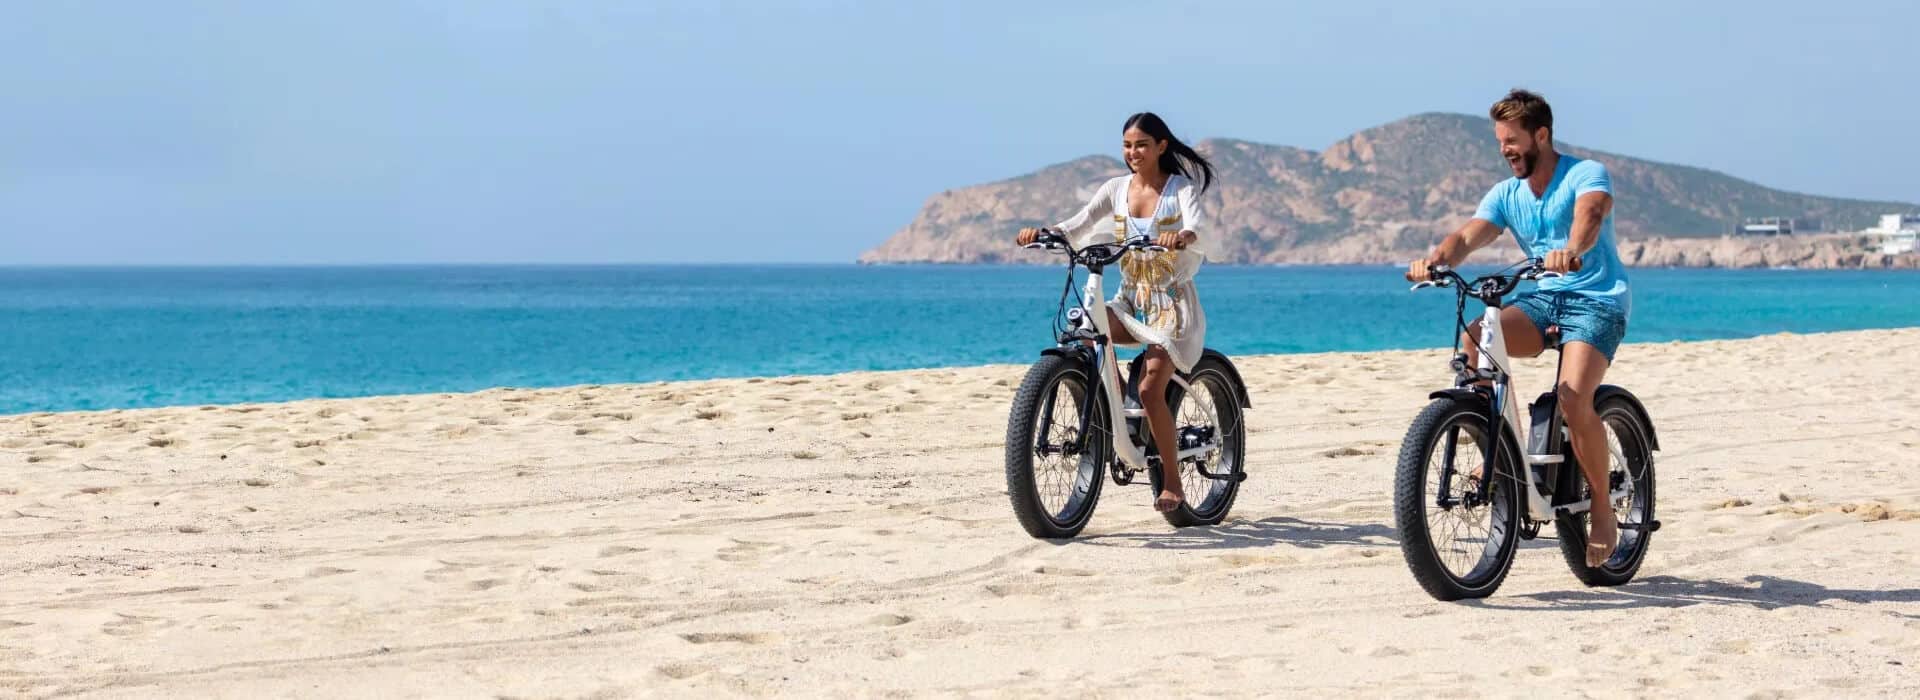 a couple riding eBikes on the beach with the ocean and mountains in the background